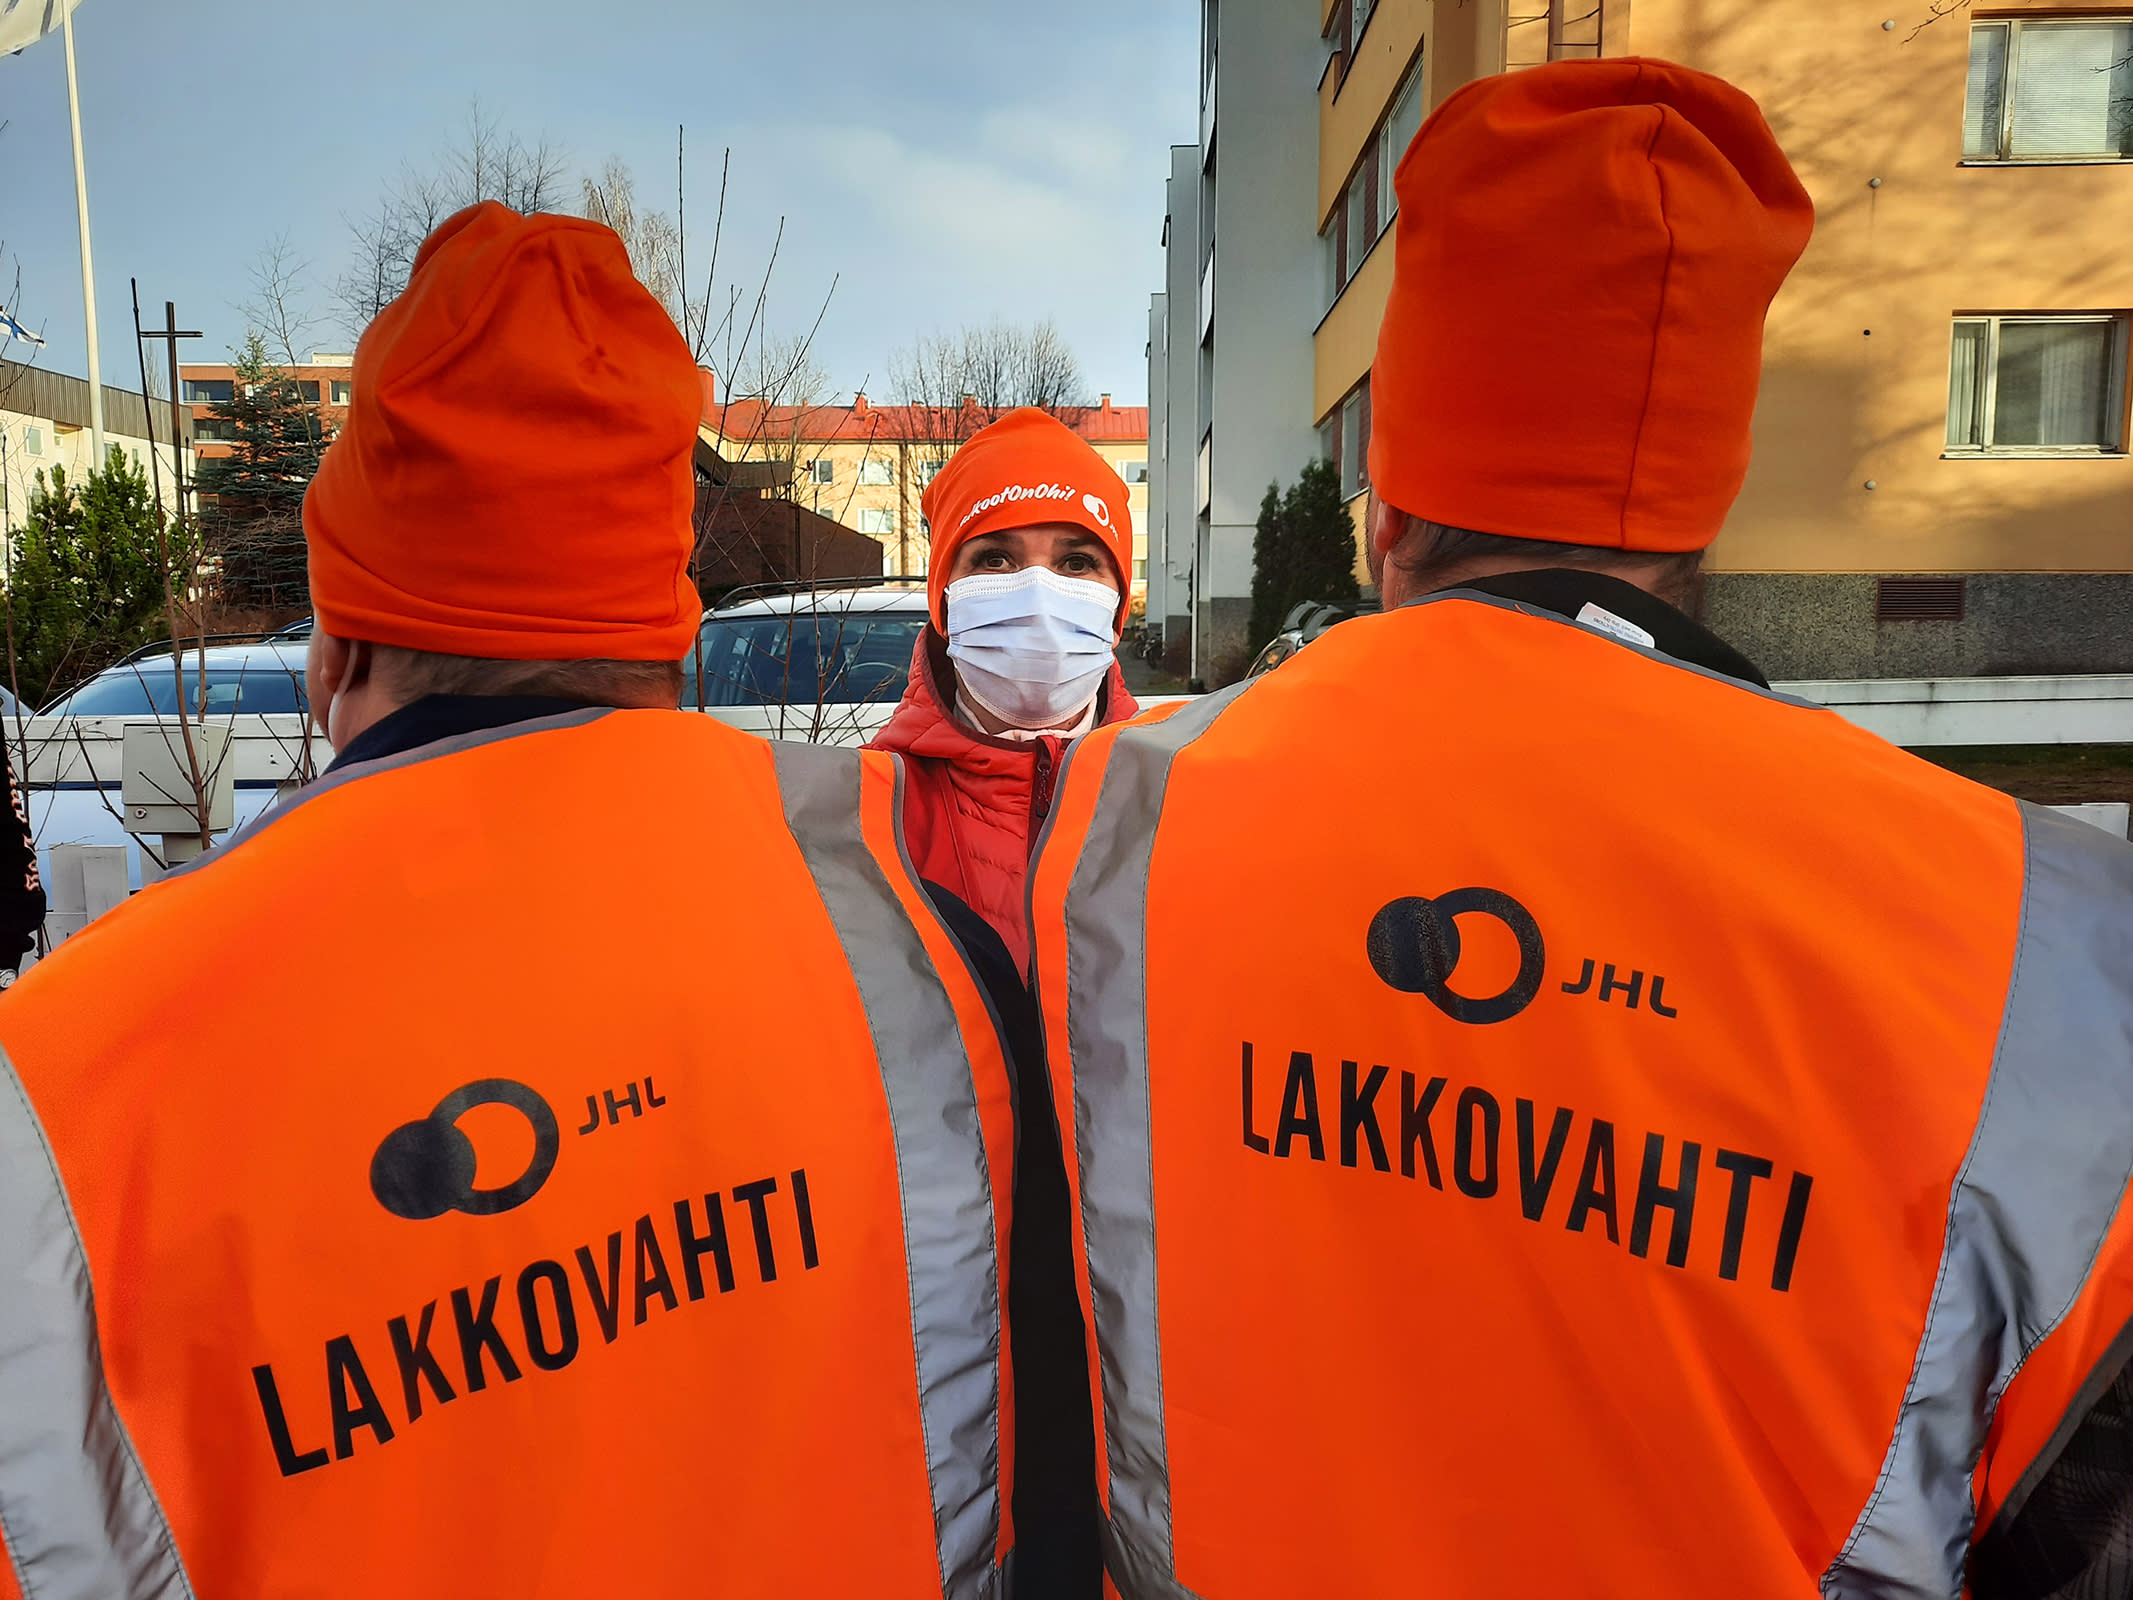 A three-day strike by Finland’s largest infrastructure company could cause traffic problems